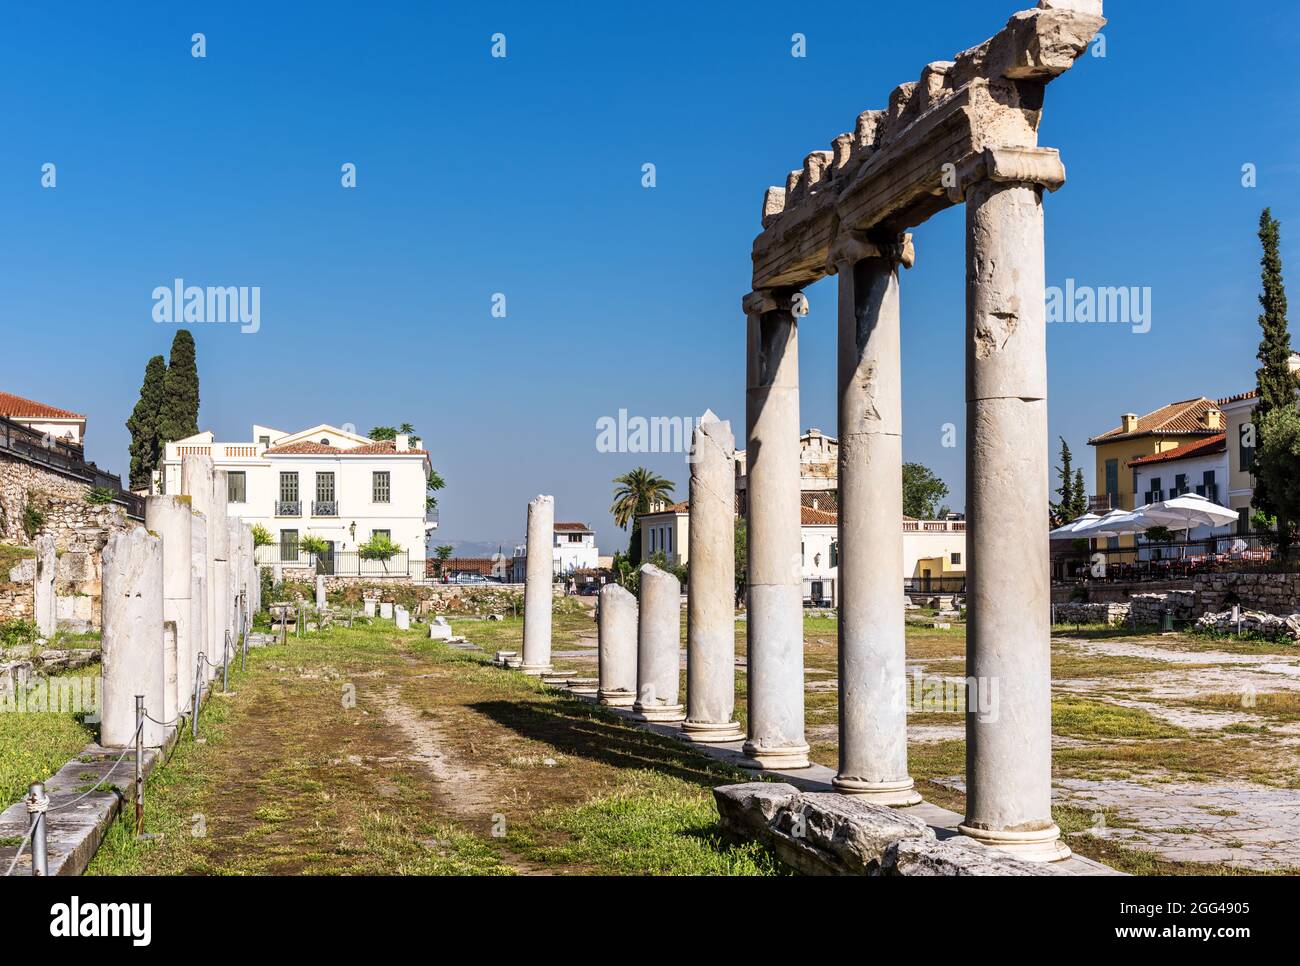 Ancient Greek ruins in Roman Agora, Athens, Greece. It is tourist attraction of Athens. View of remains of Classical buildings in Athens city center i Stock Photo